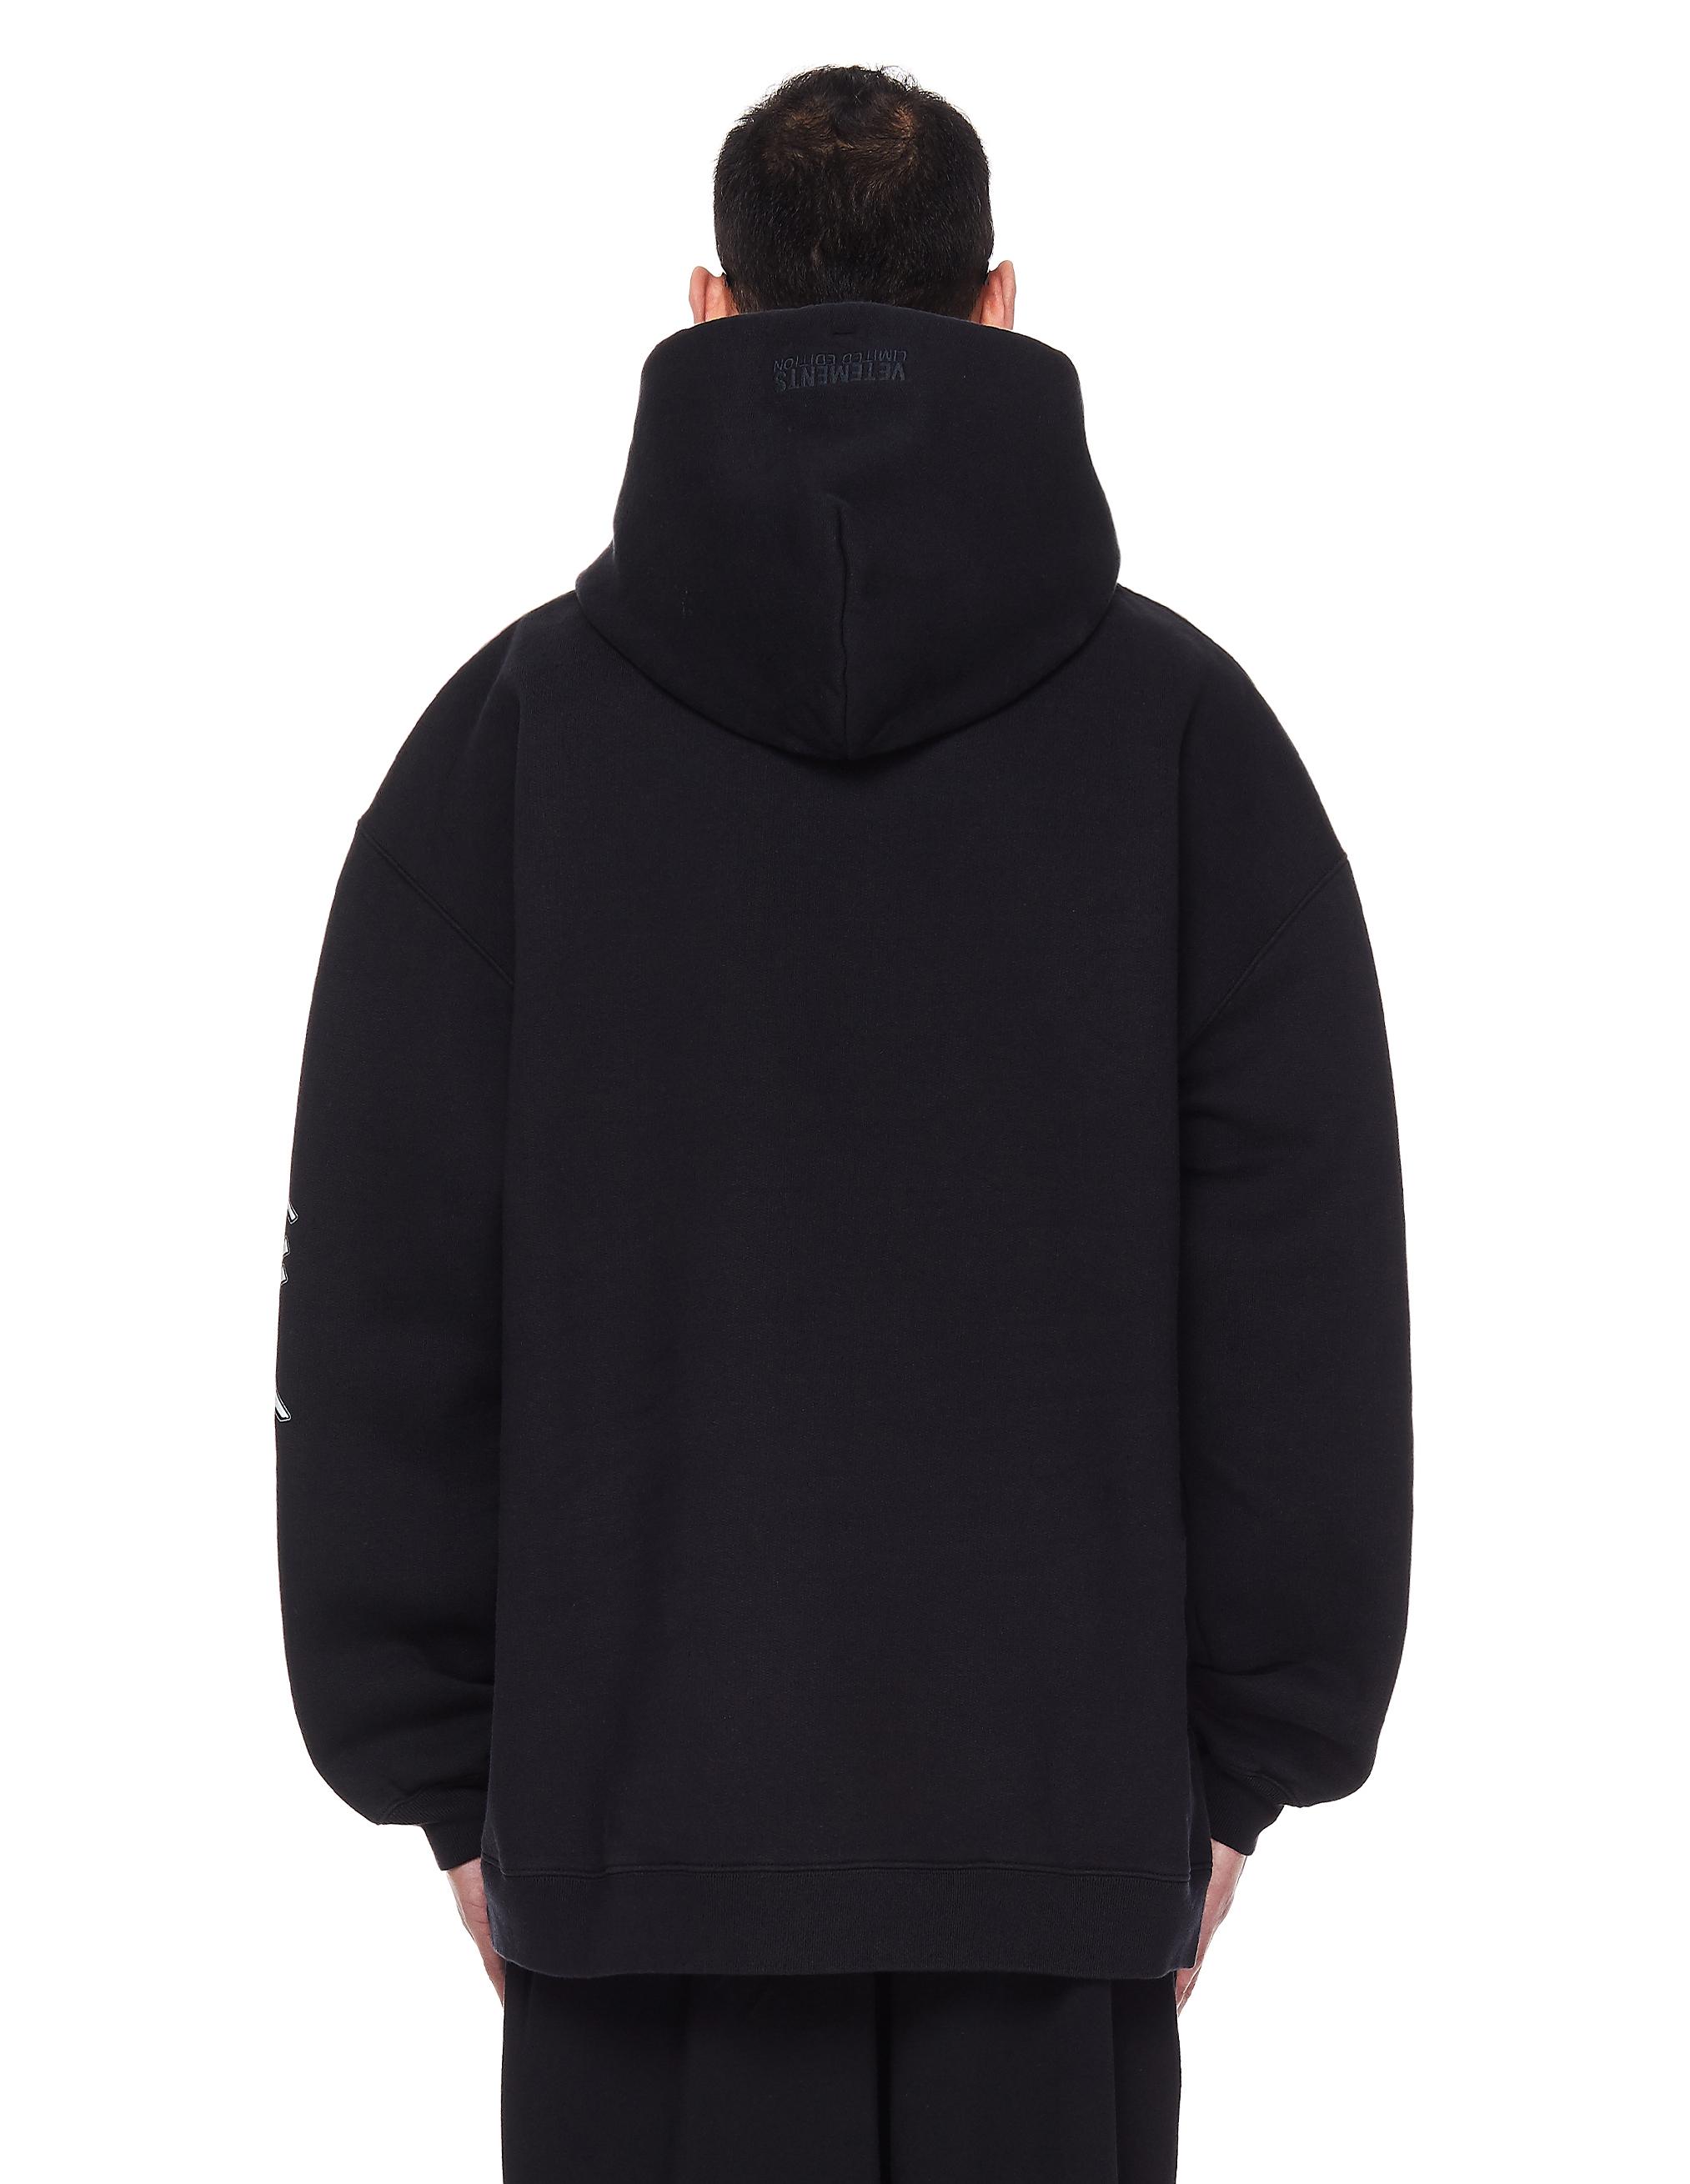 Vetements Cotton The World Is Yours Hoodie in Black for Men - Lyst